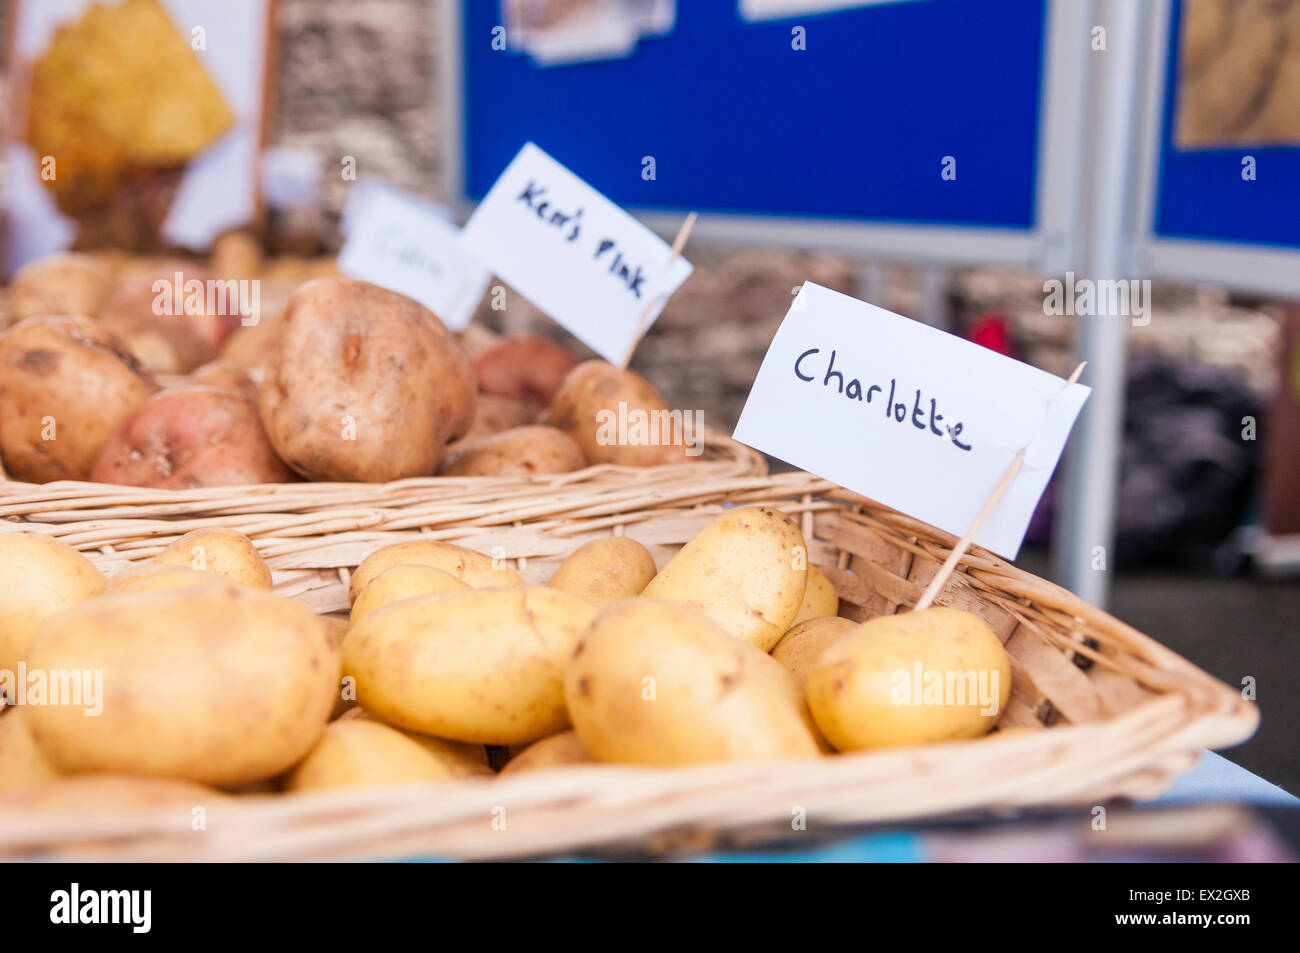 Charlotte and Kerr's Pink potatoes on display at a food fair. Stock Photo